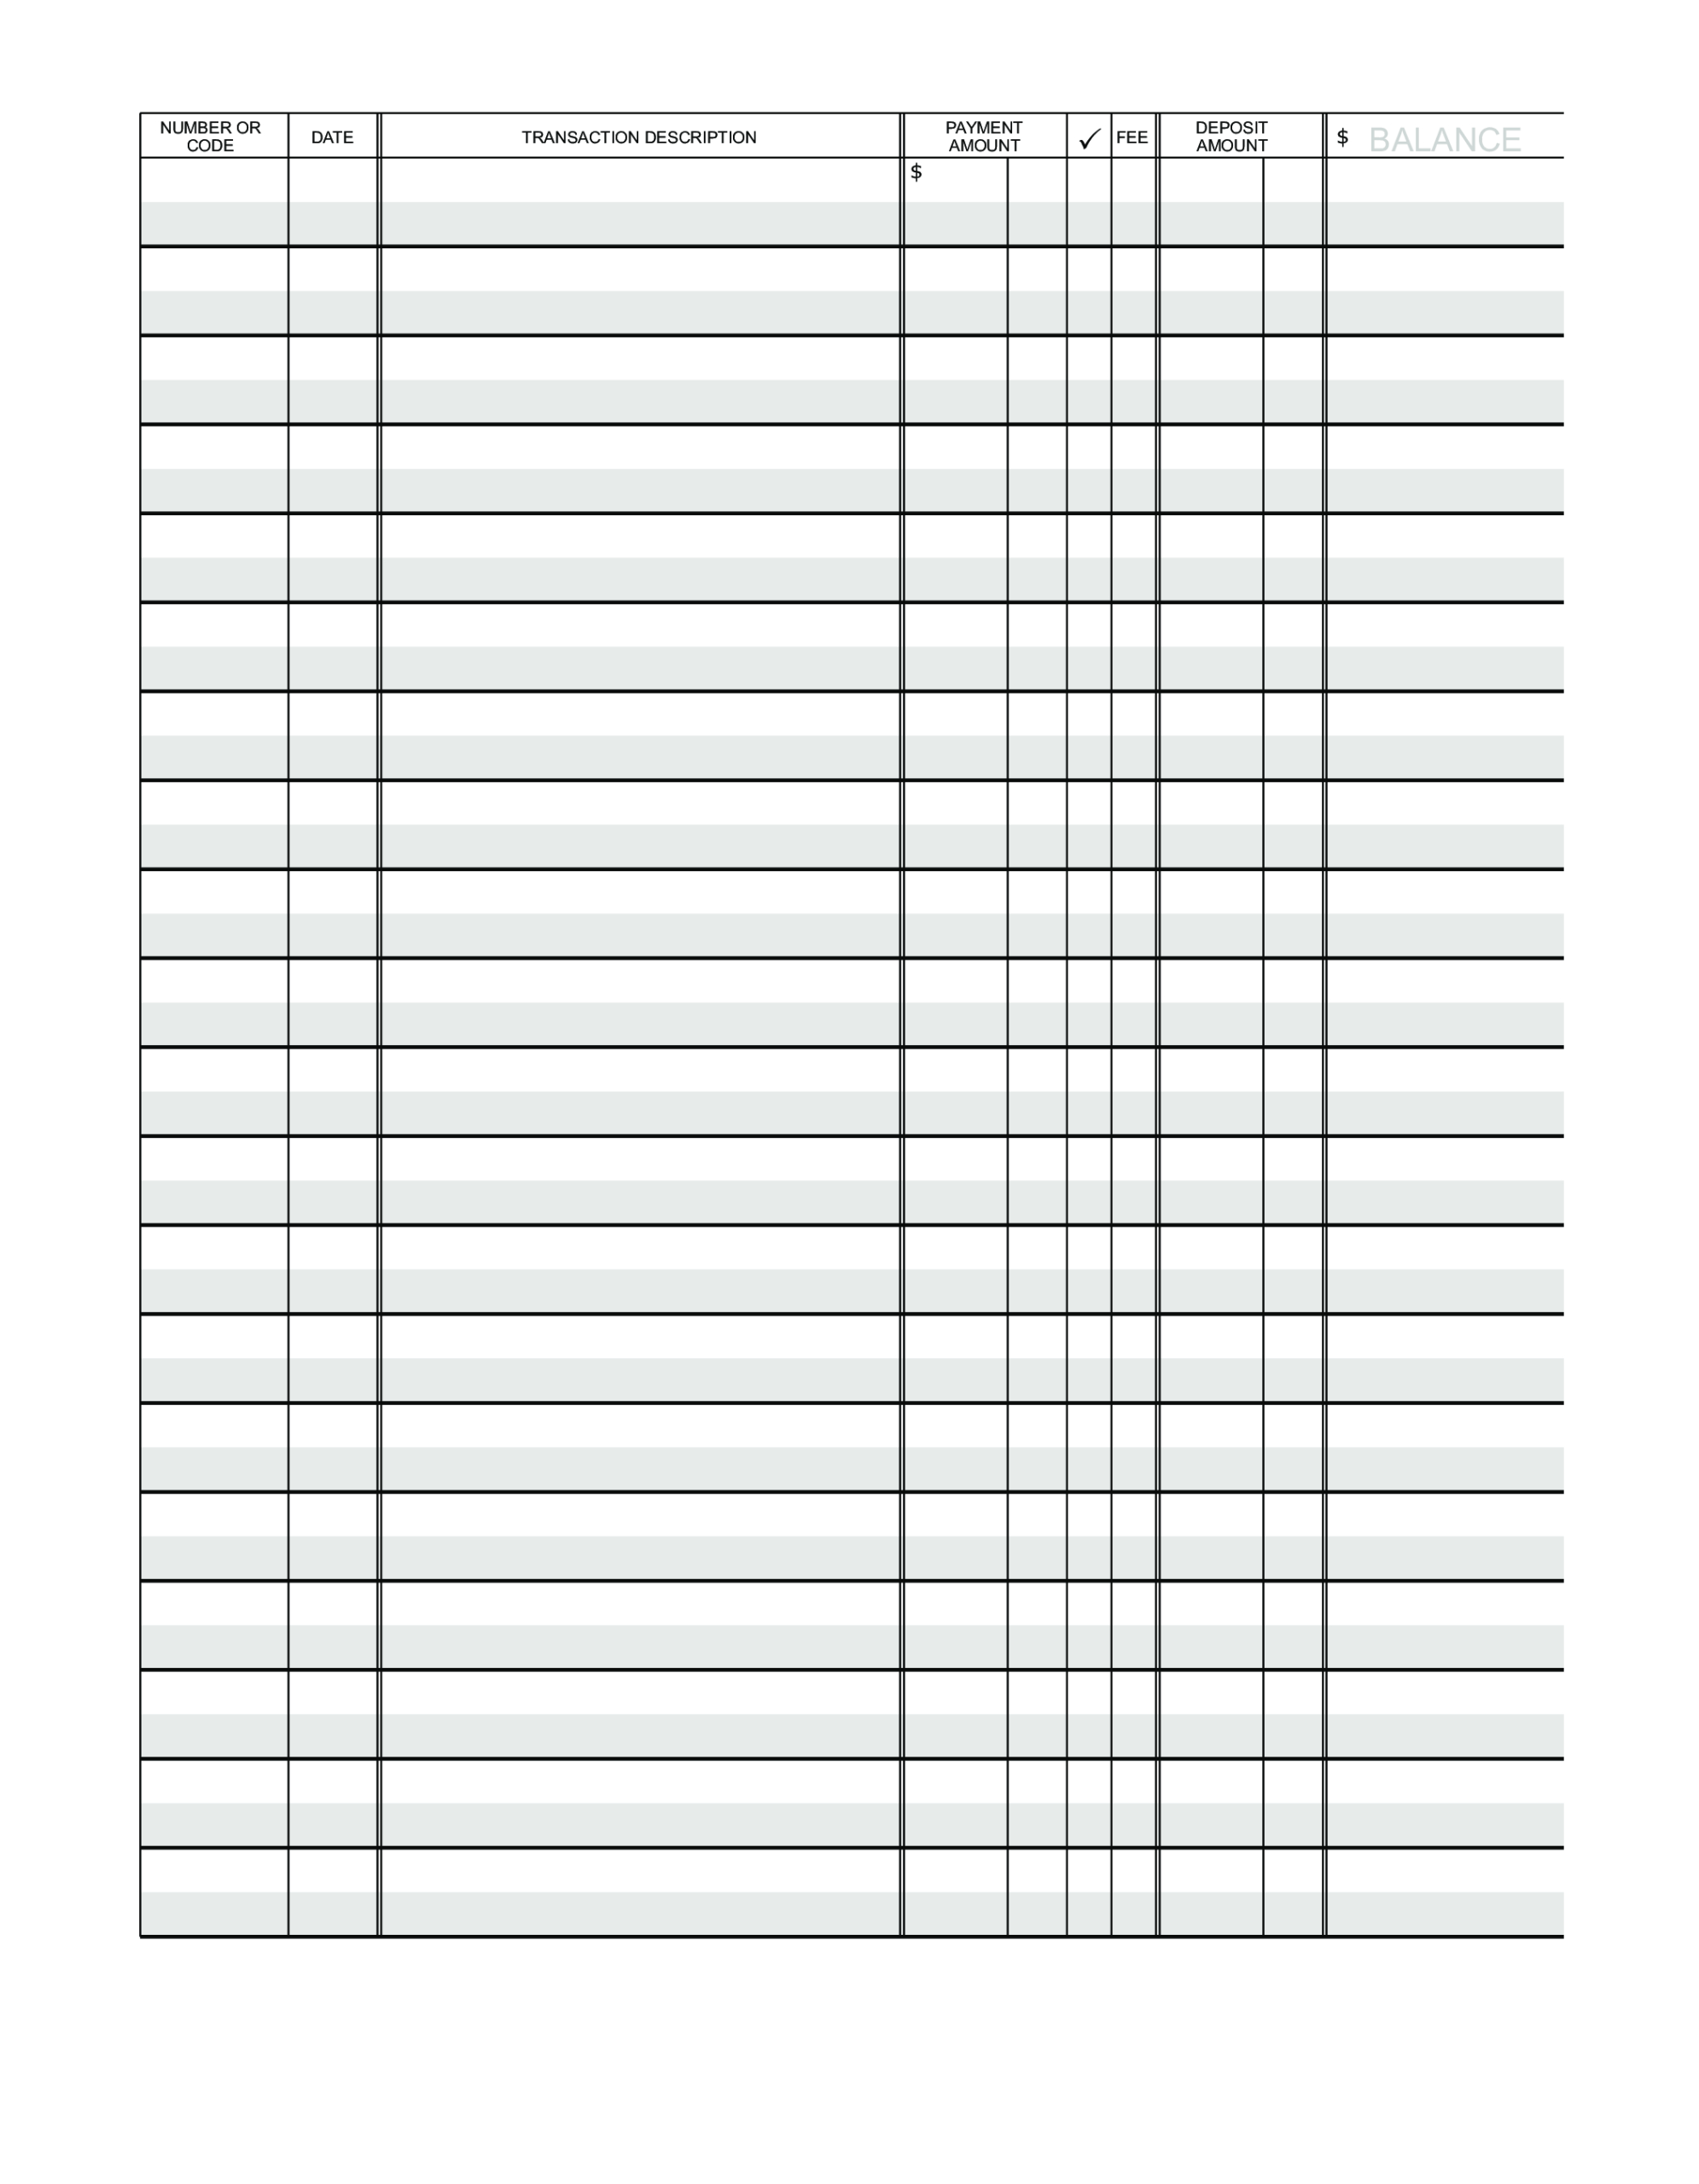 Blank Ledger Paper | Templates At Allbusinesstemplates Intended For Blank Ledger Template